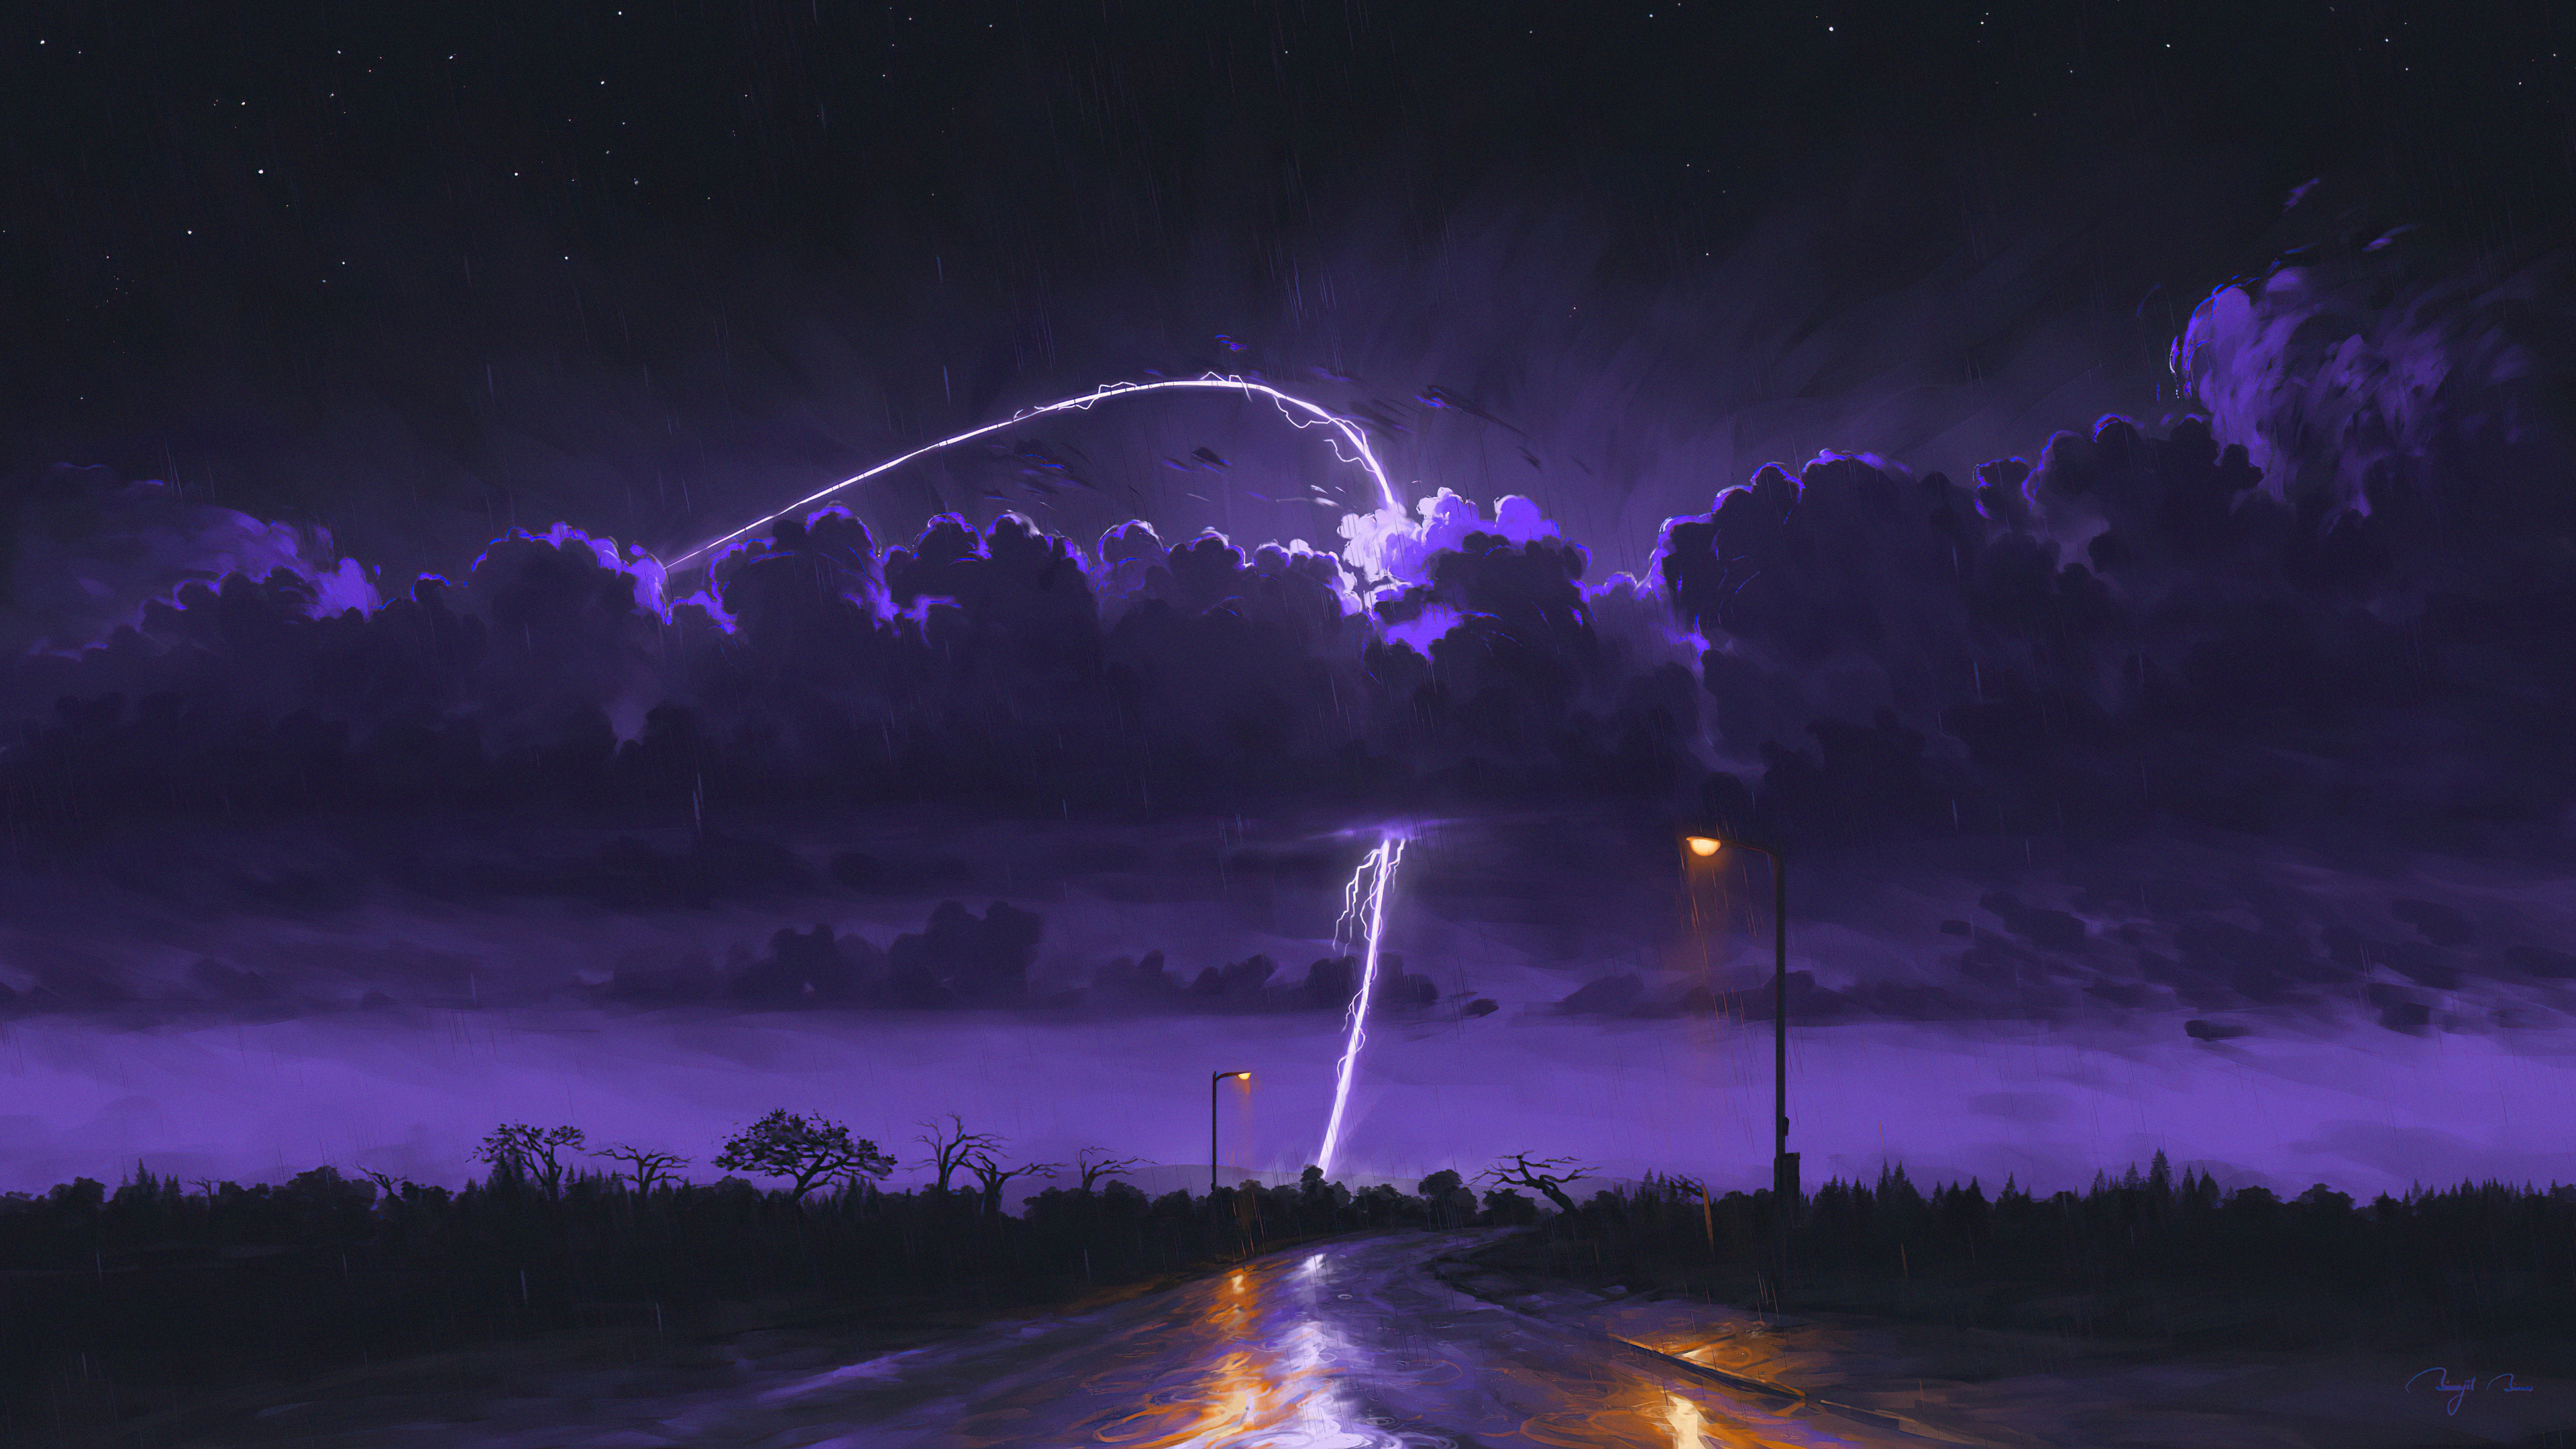 Rainy Night Storm Laptop Full HD 1080P HD 4k Wallpaper, Image, Background, Photo and Picture